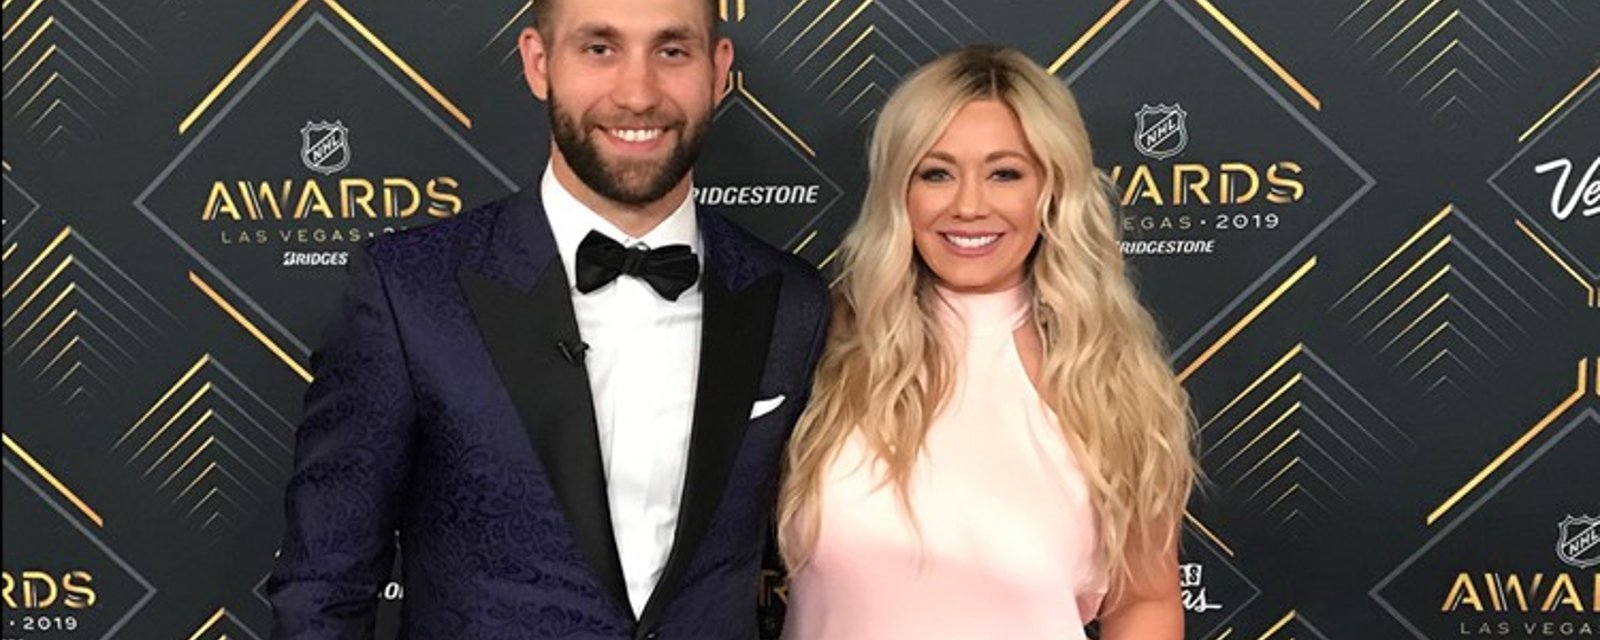 Zucker’s wife rips the men who harassed her at the NHL awards